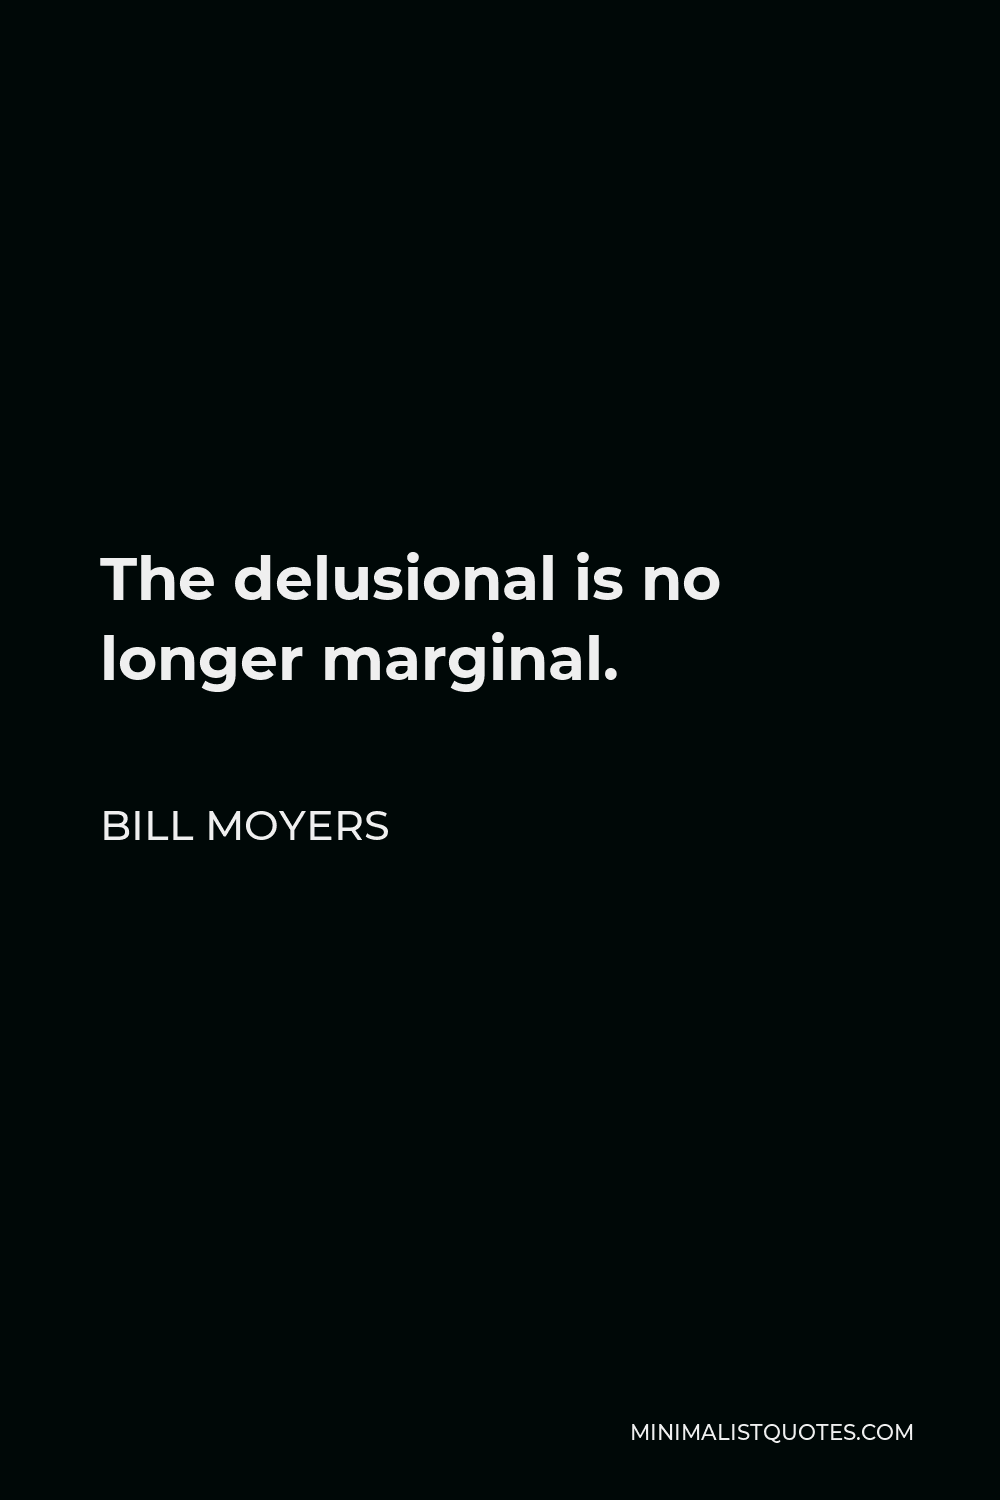 Bill Moyers Quote - The delusional is no longer marginal.